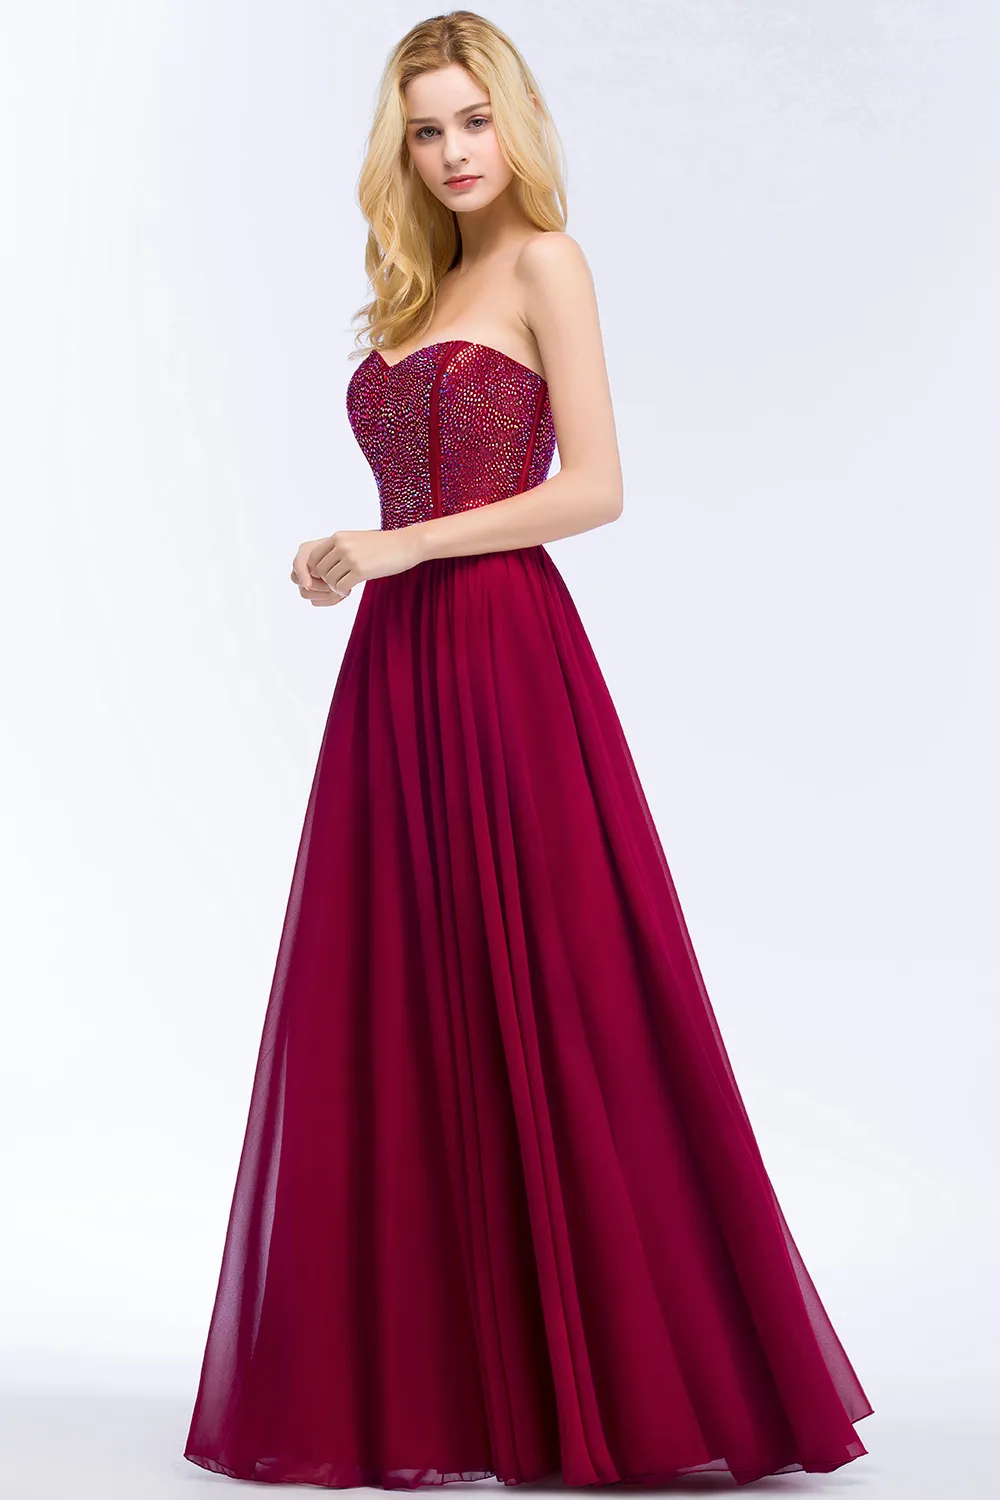 Beaded Chiffon Long Prom Dresses Real Image Sweetheart Beaded Stones Formal Party Avond Speciale Occasionele Jurken CPS883